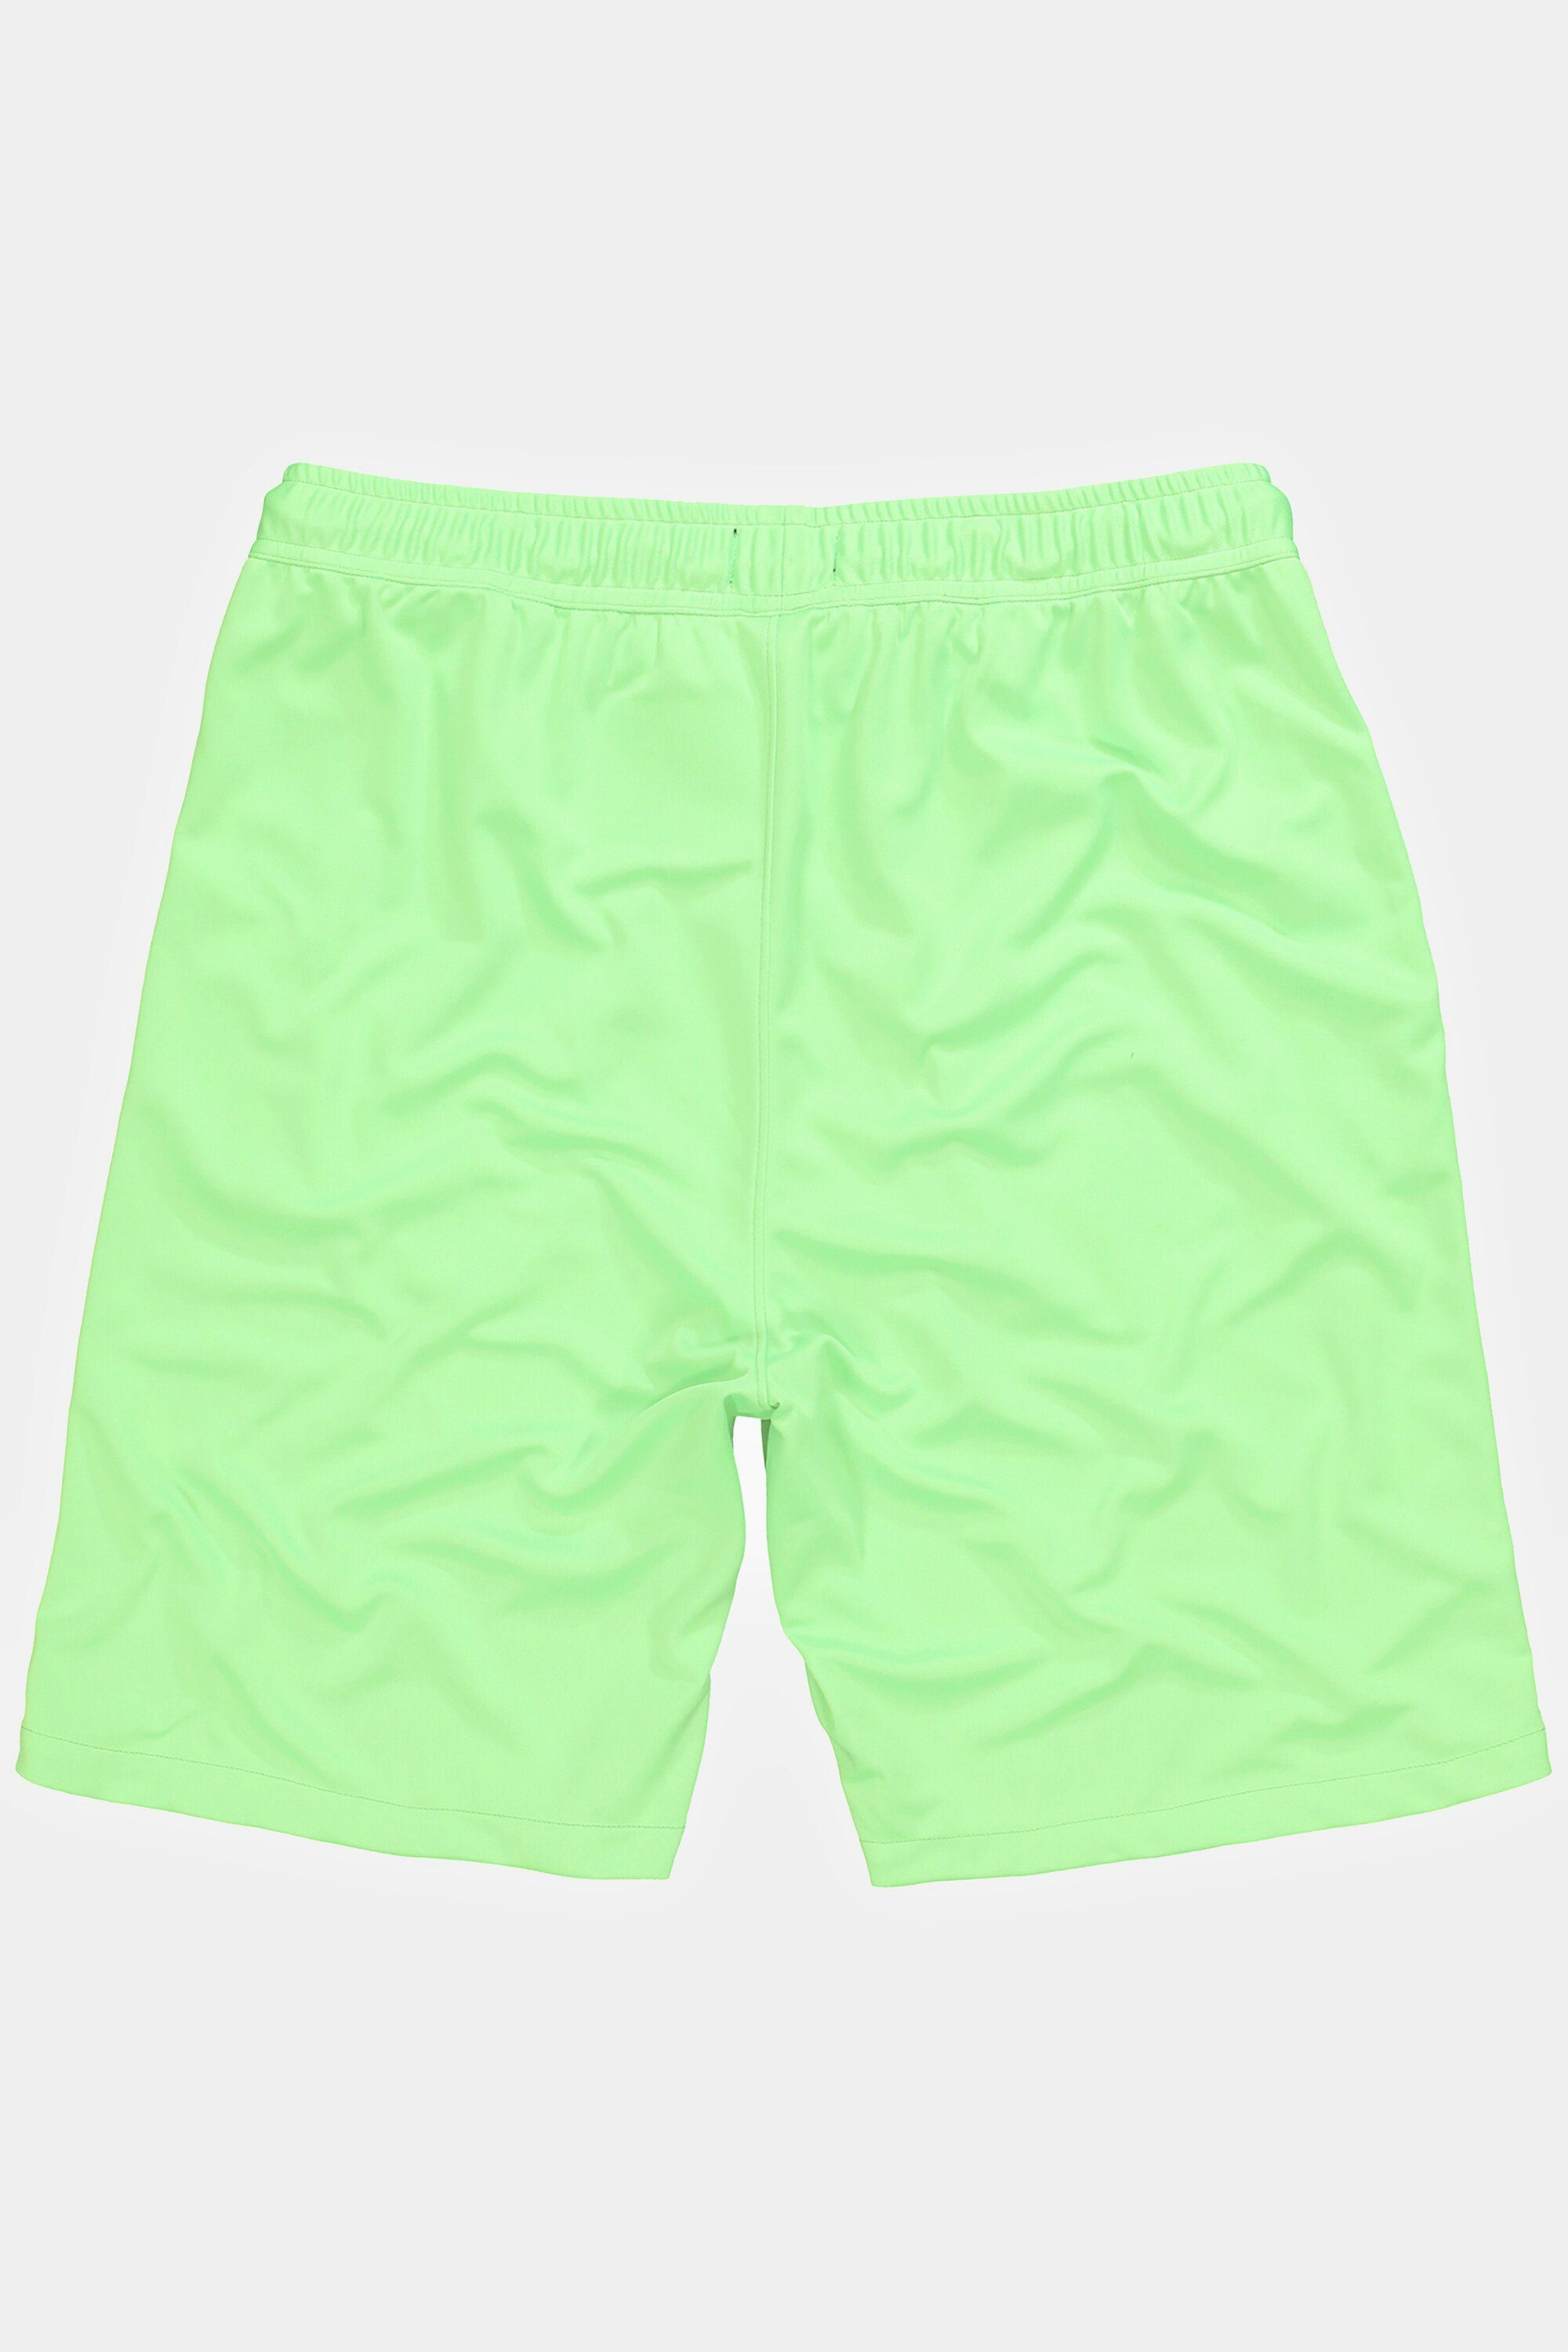 QuickDry JP1880 Fitness Funktions-Shorts Bermudas